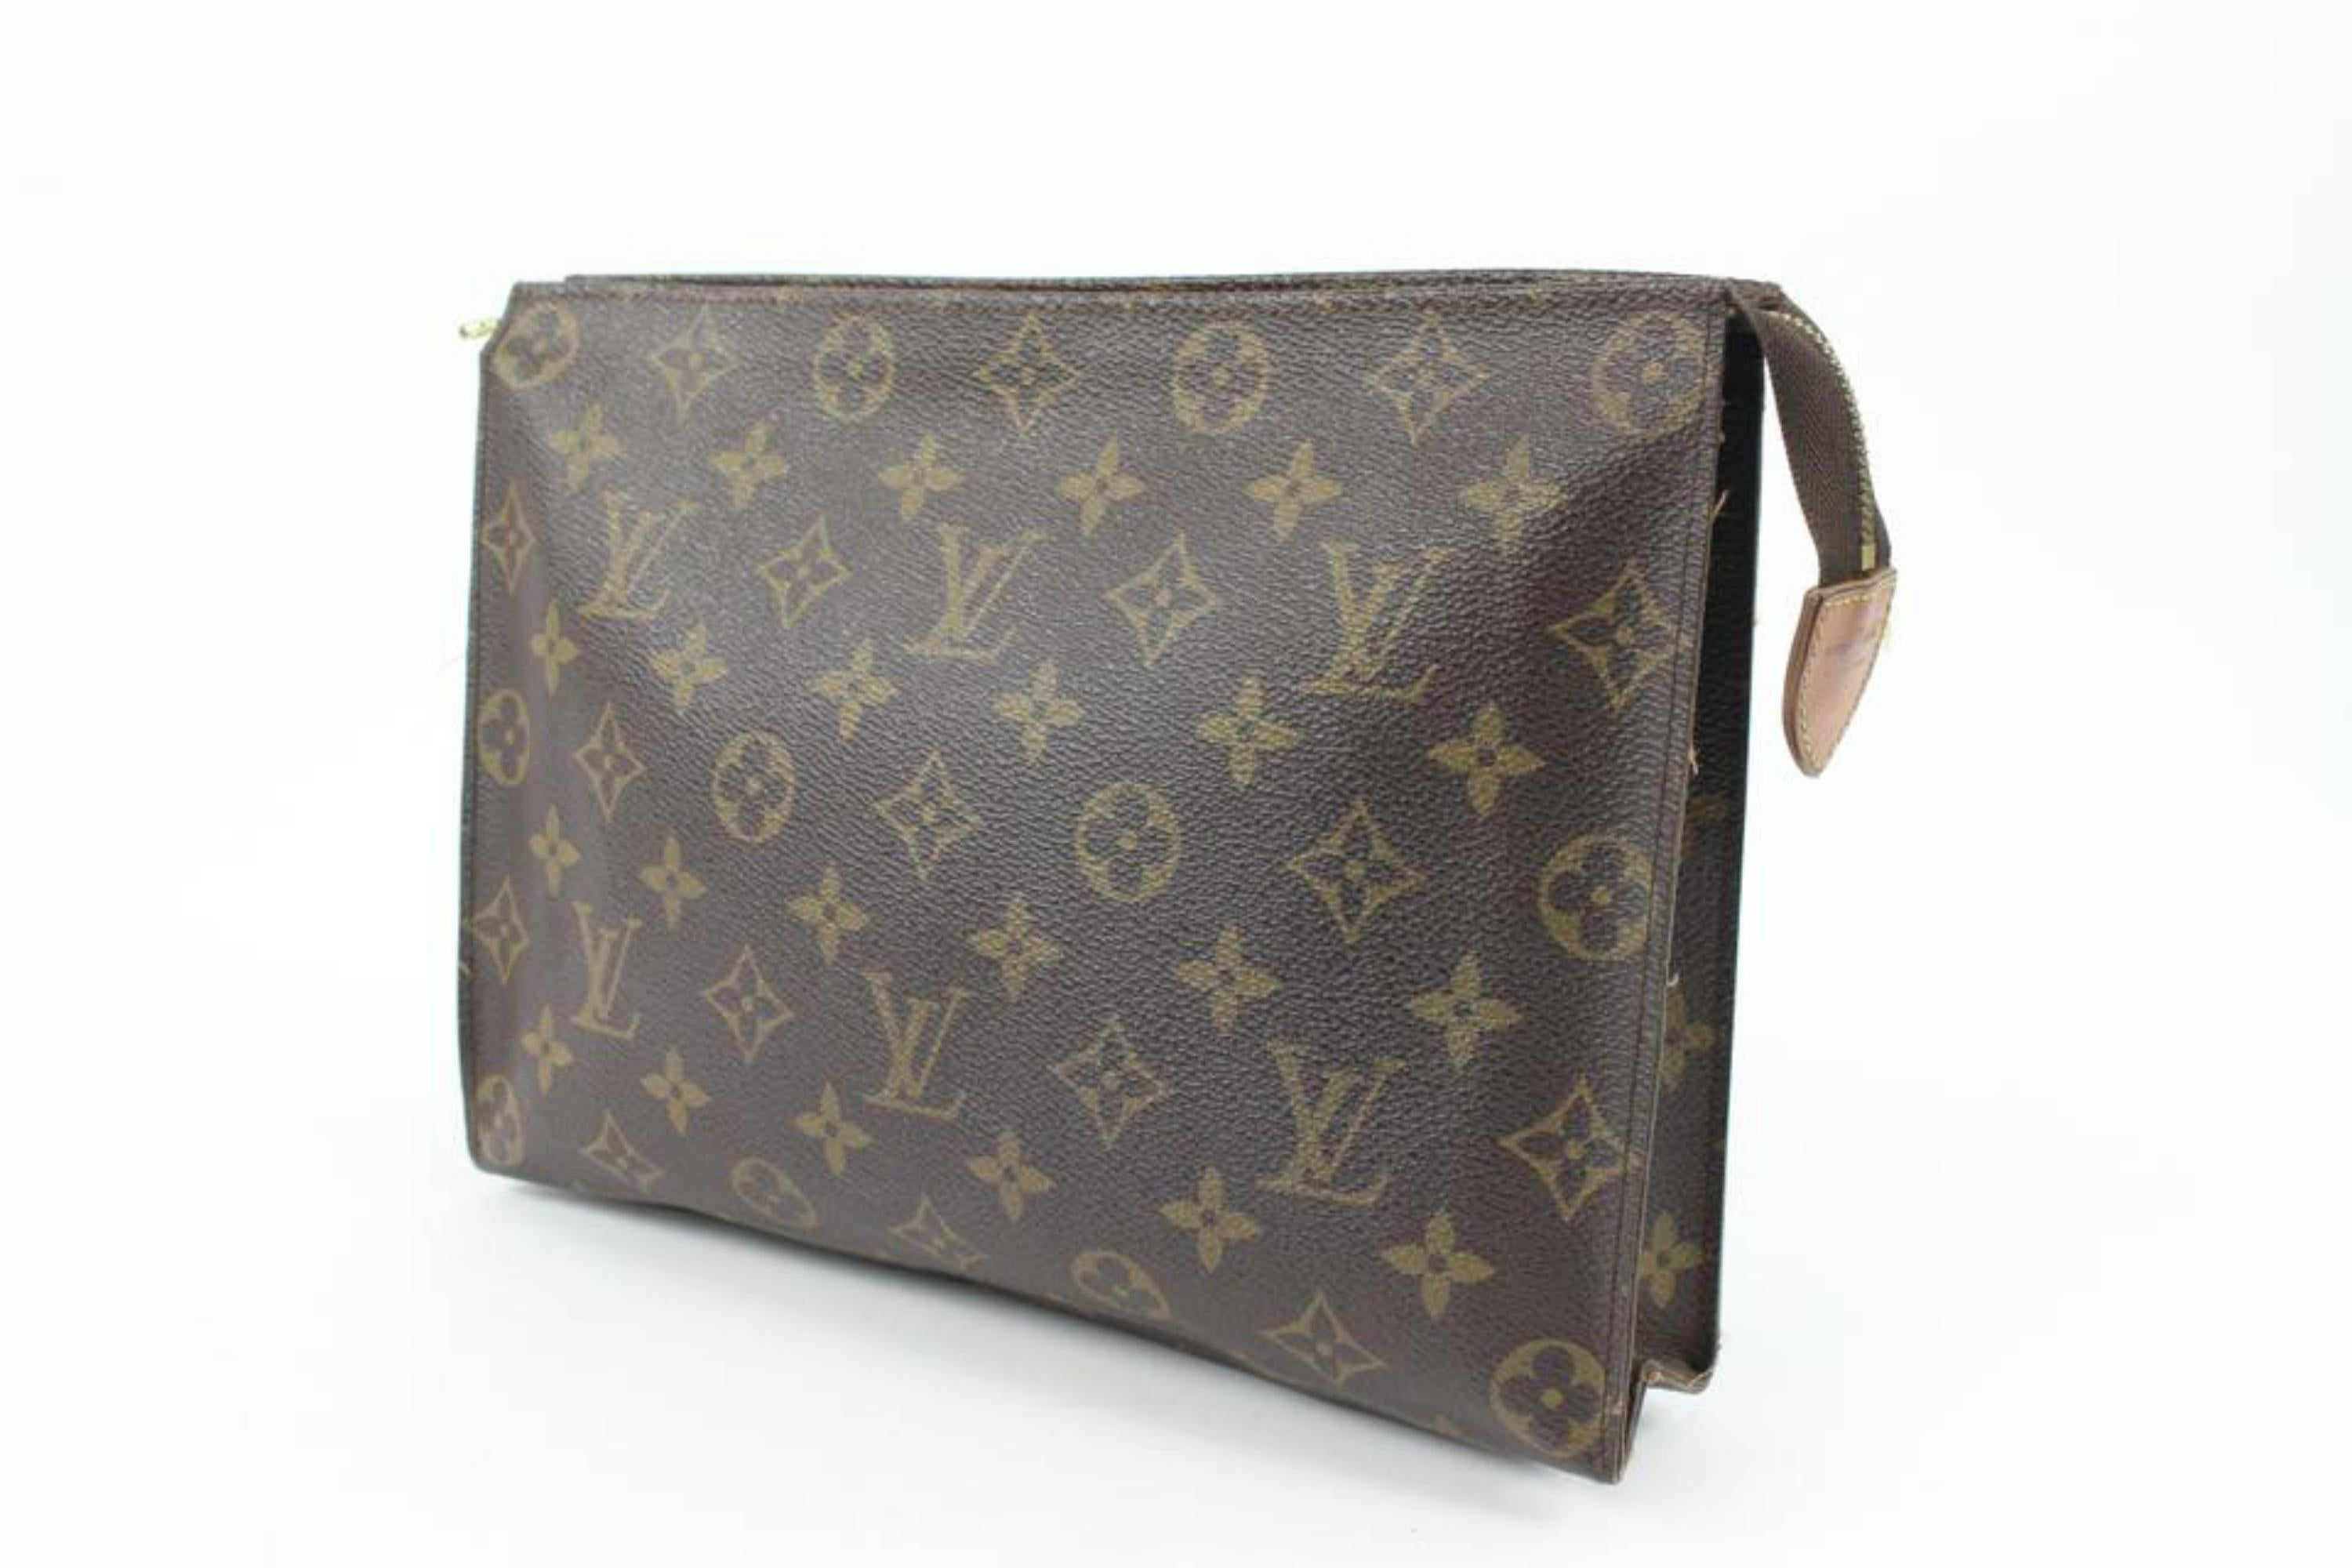 Louis Vuitton Discontinued Monogram Toiletry Pouch 26 Poche Toilette 114lv2
Date Code/Serial Number: 862 AN
Made In: France
Measurements: Length:  10